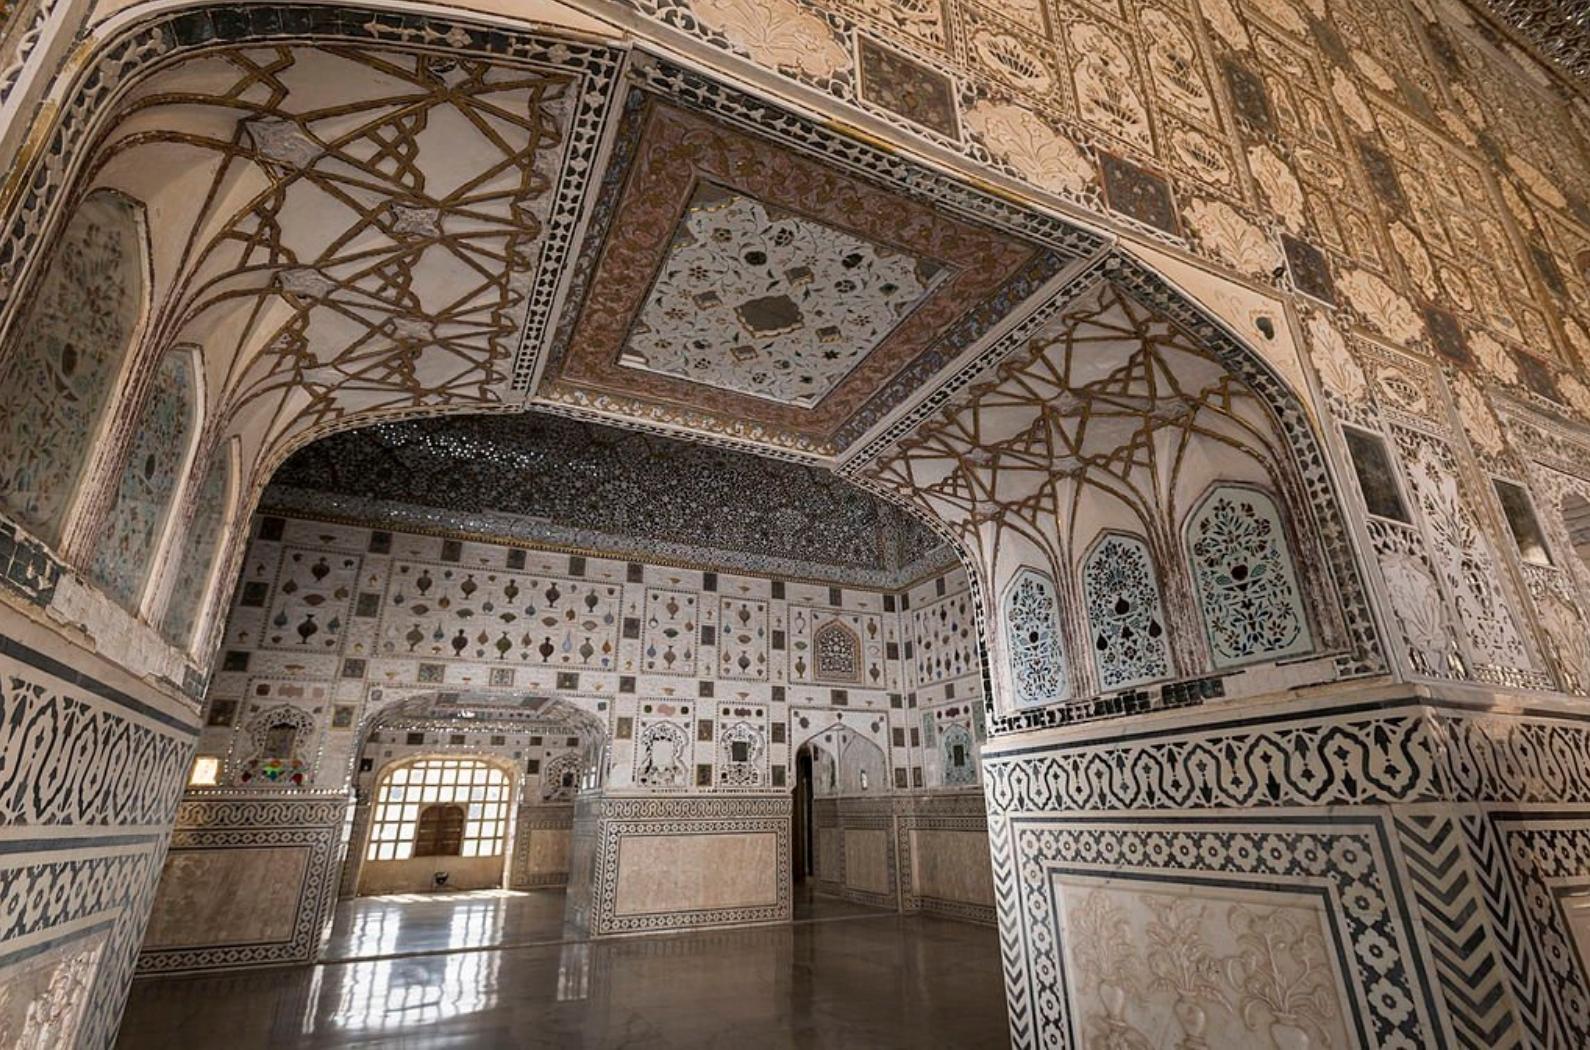 Sheesh Mahal, the mirror palace, is part of the private palaces of the Maharajas at Amber Fort.